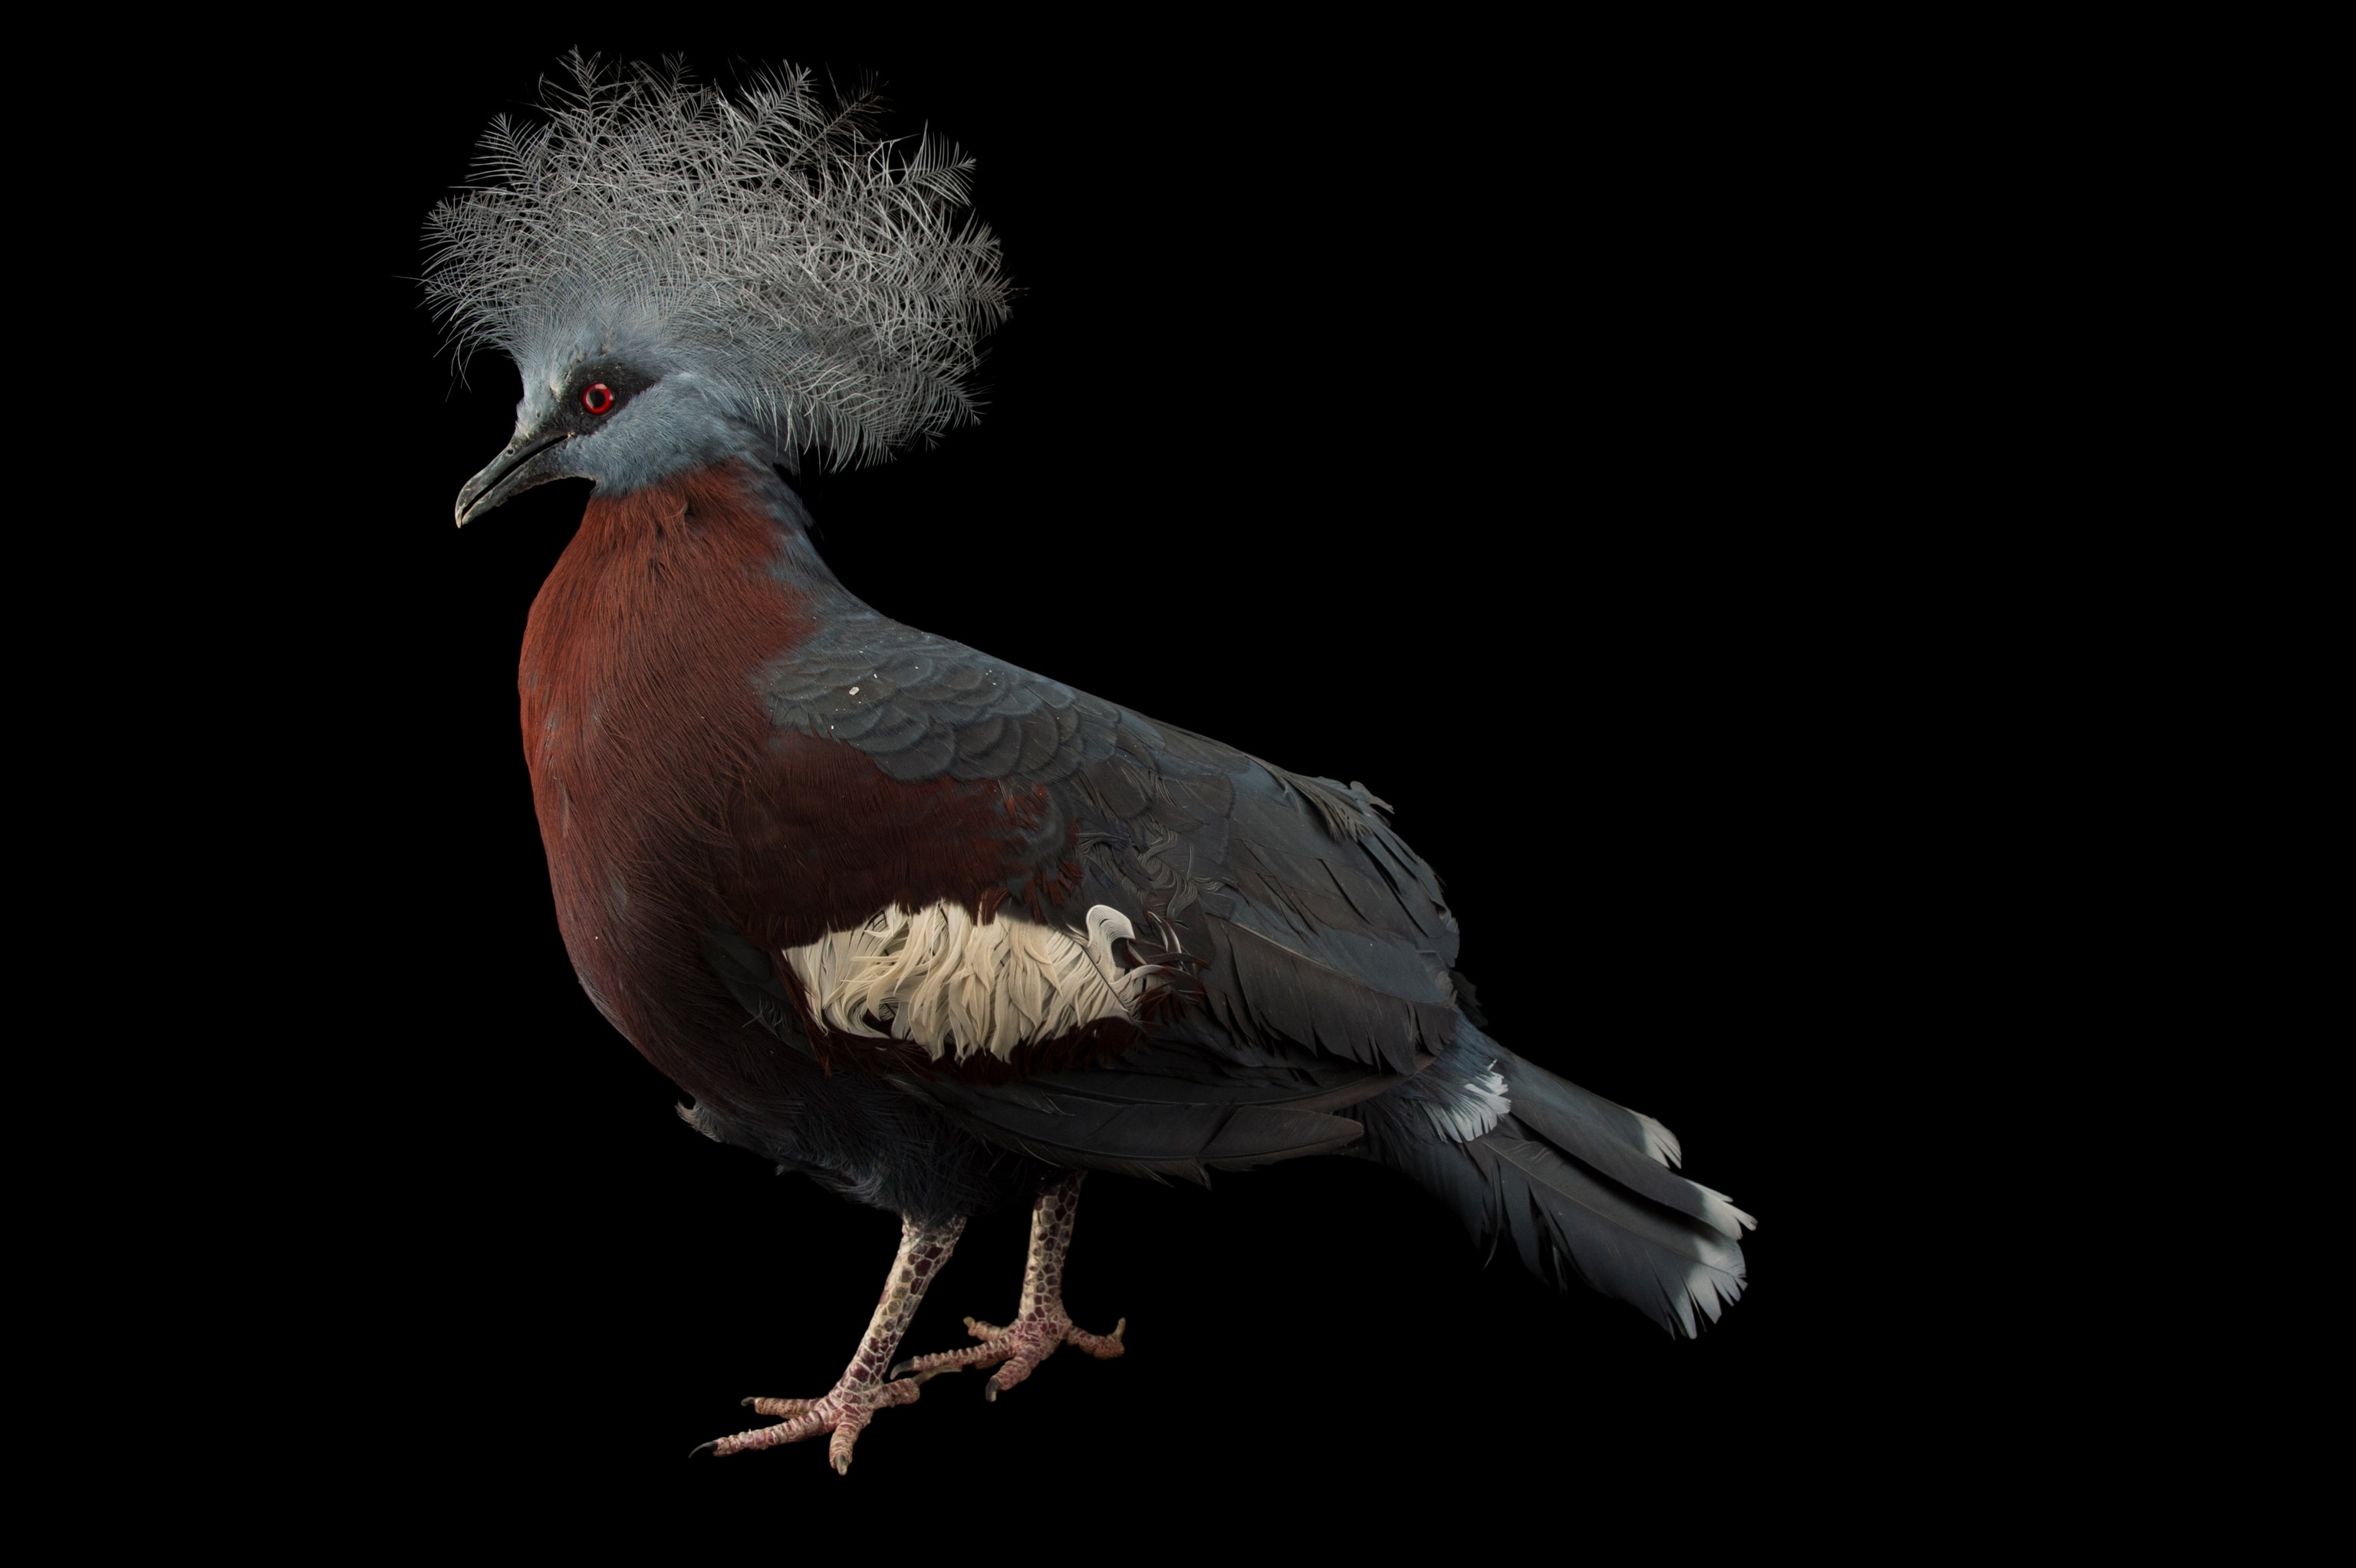 Studio photograph of a vulnerable sheepmaker's crowned pigeon